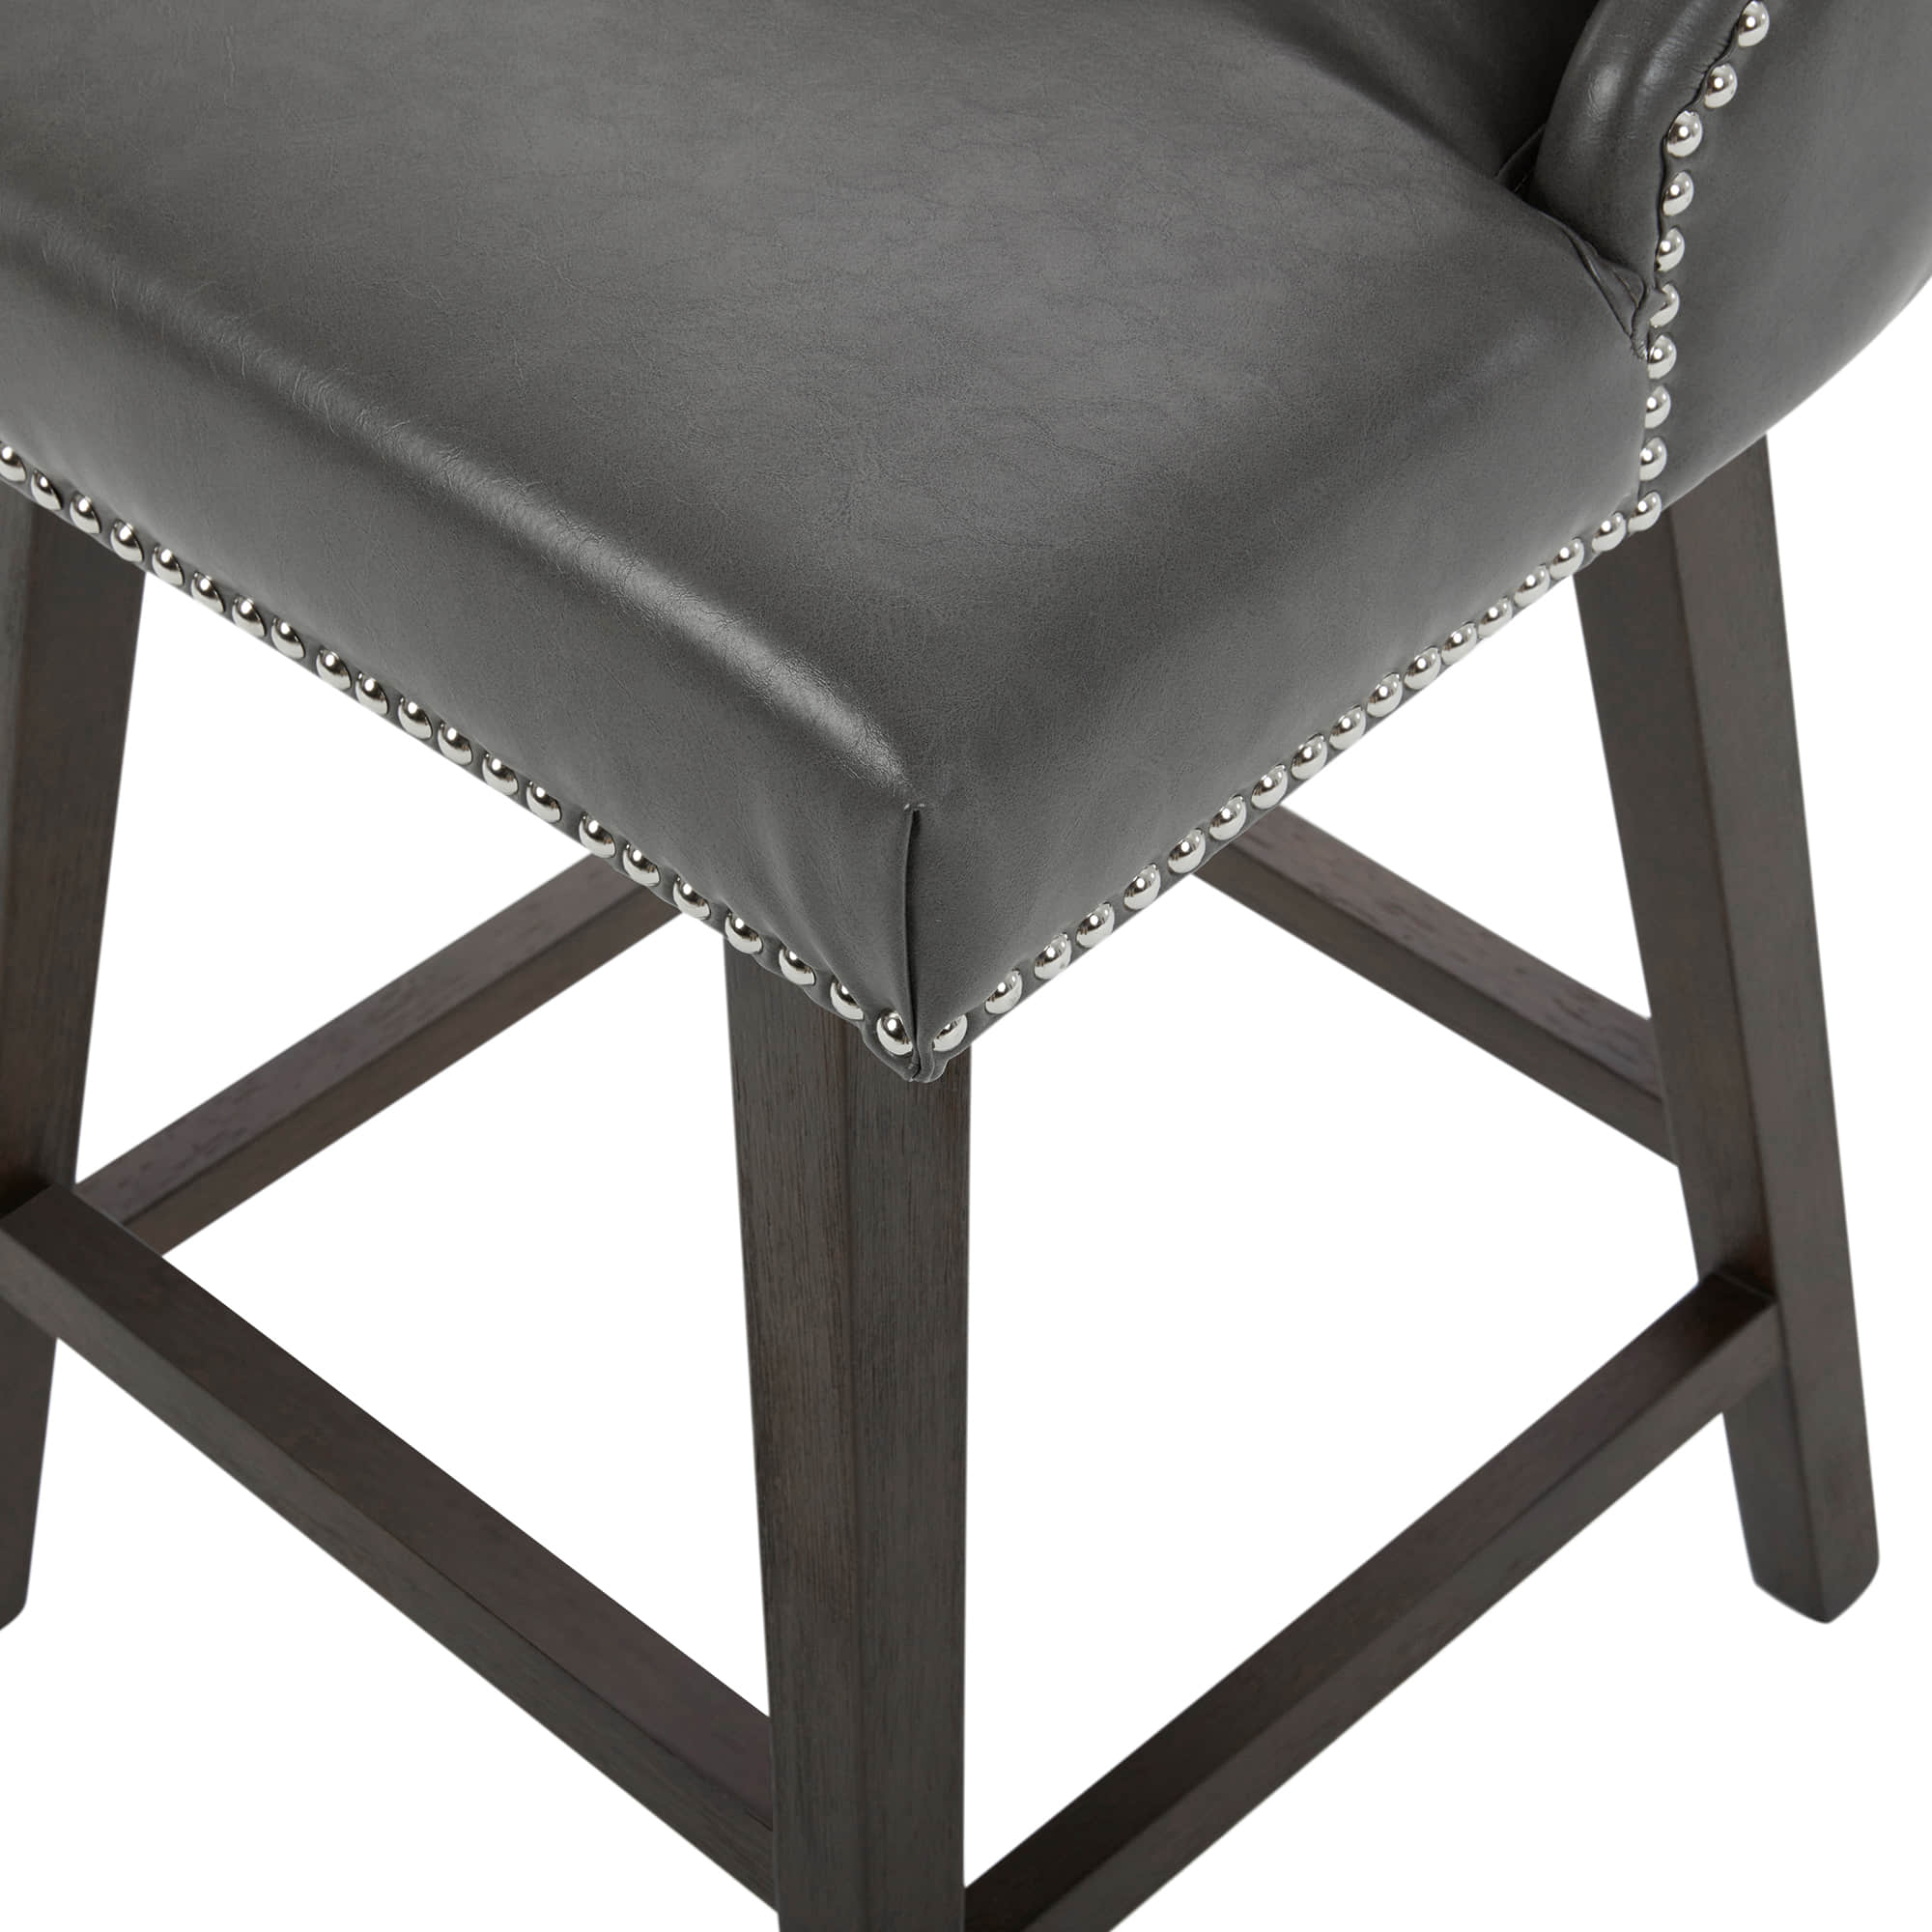 CHITA LIVING-Asher Swivel Counter Stool with Nailhead Trim( Set of 2)-Counter Stools-Faux Leather-Retro Gray-